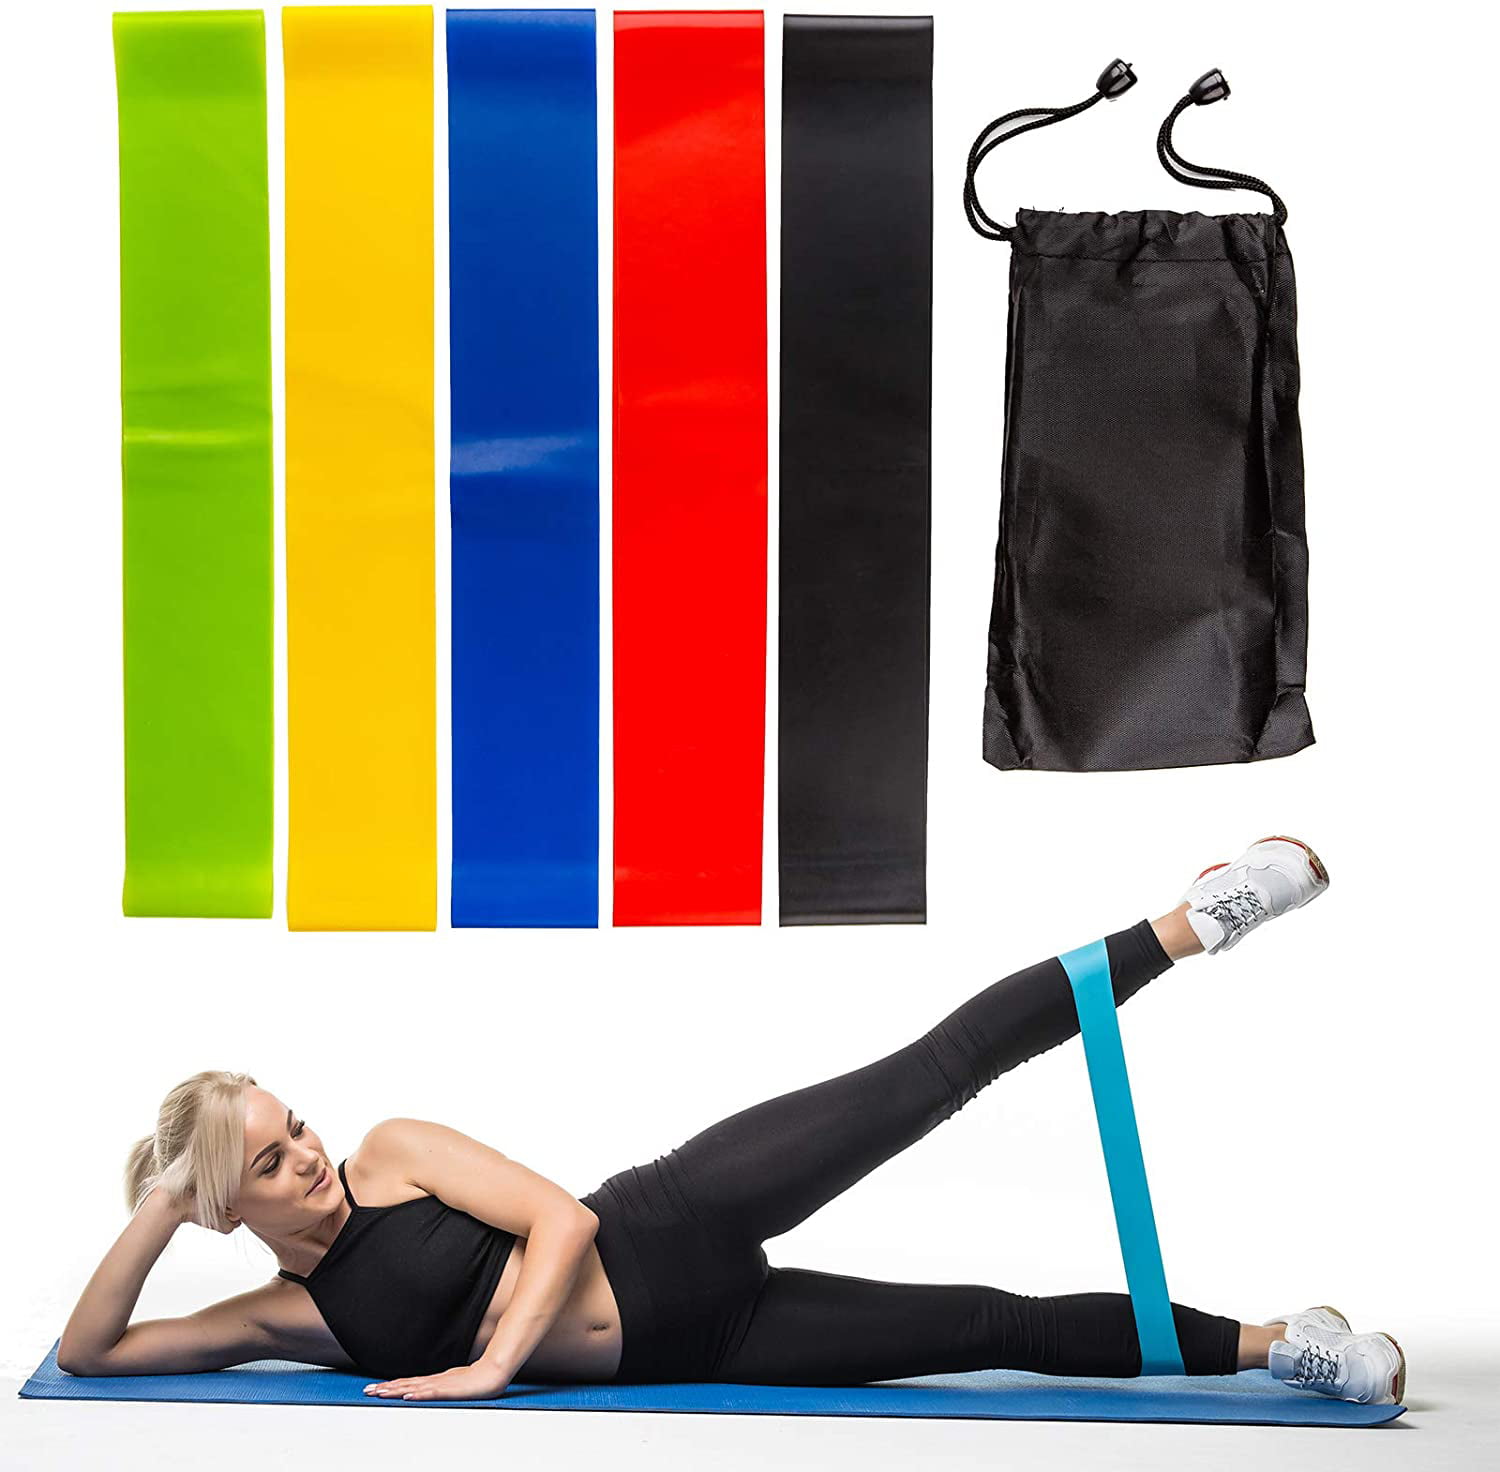 Resistance Bands Exercise Loop Home Fitness Yoga Pilates Physio Workout Set of 5 